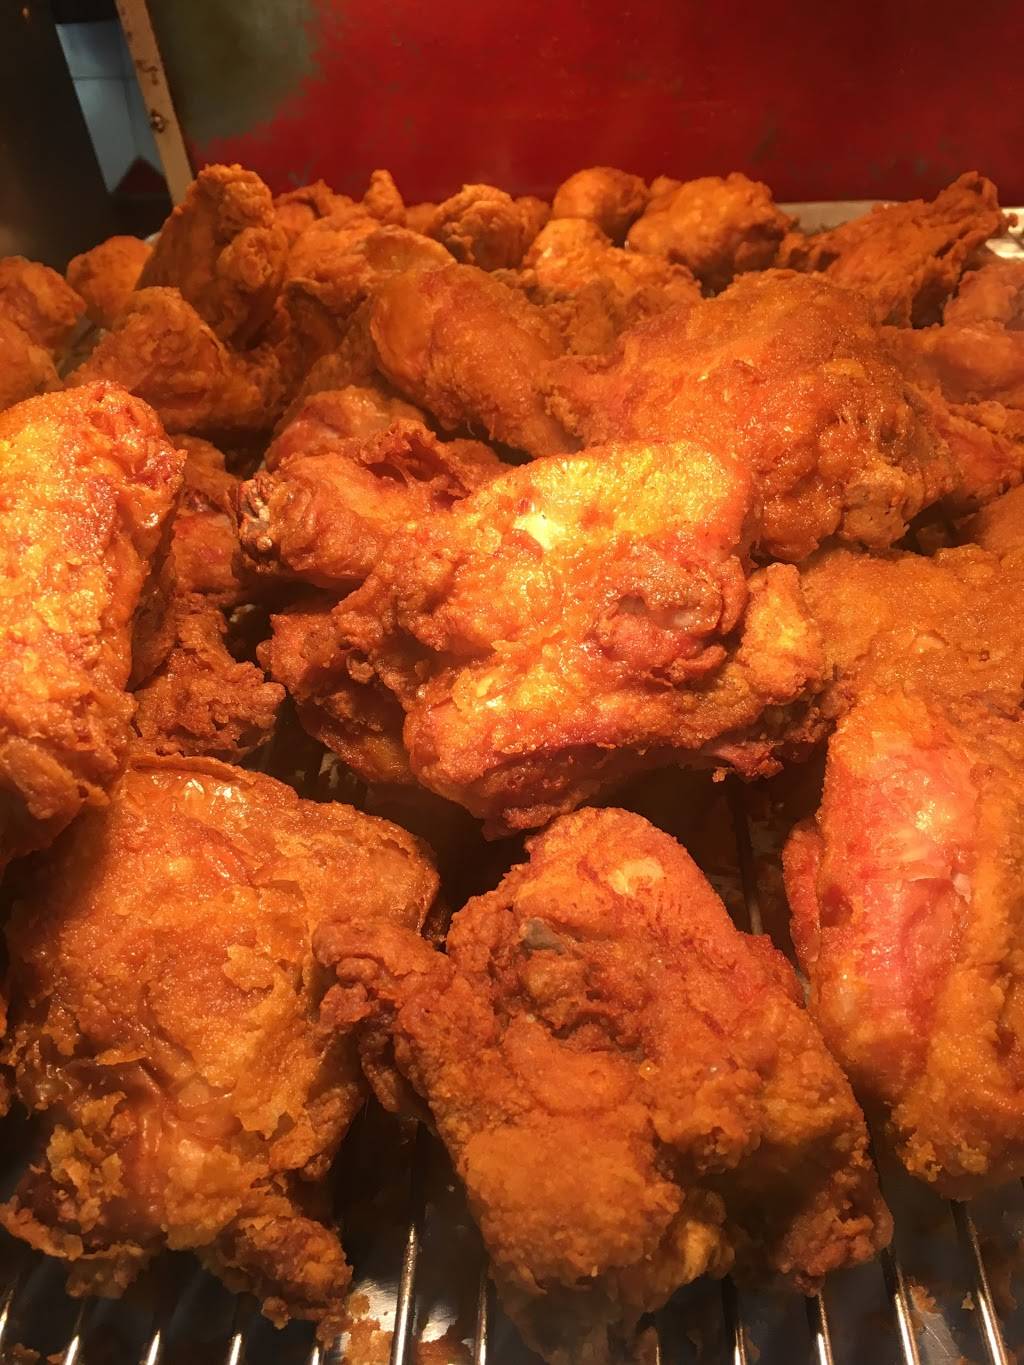 Kennedy Fried Chicken | restaurant | 647 E Tremont Ave, Bronx, NY 10457, USA | 9176318300 OR +1 917-631-8300